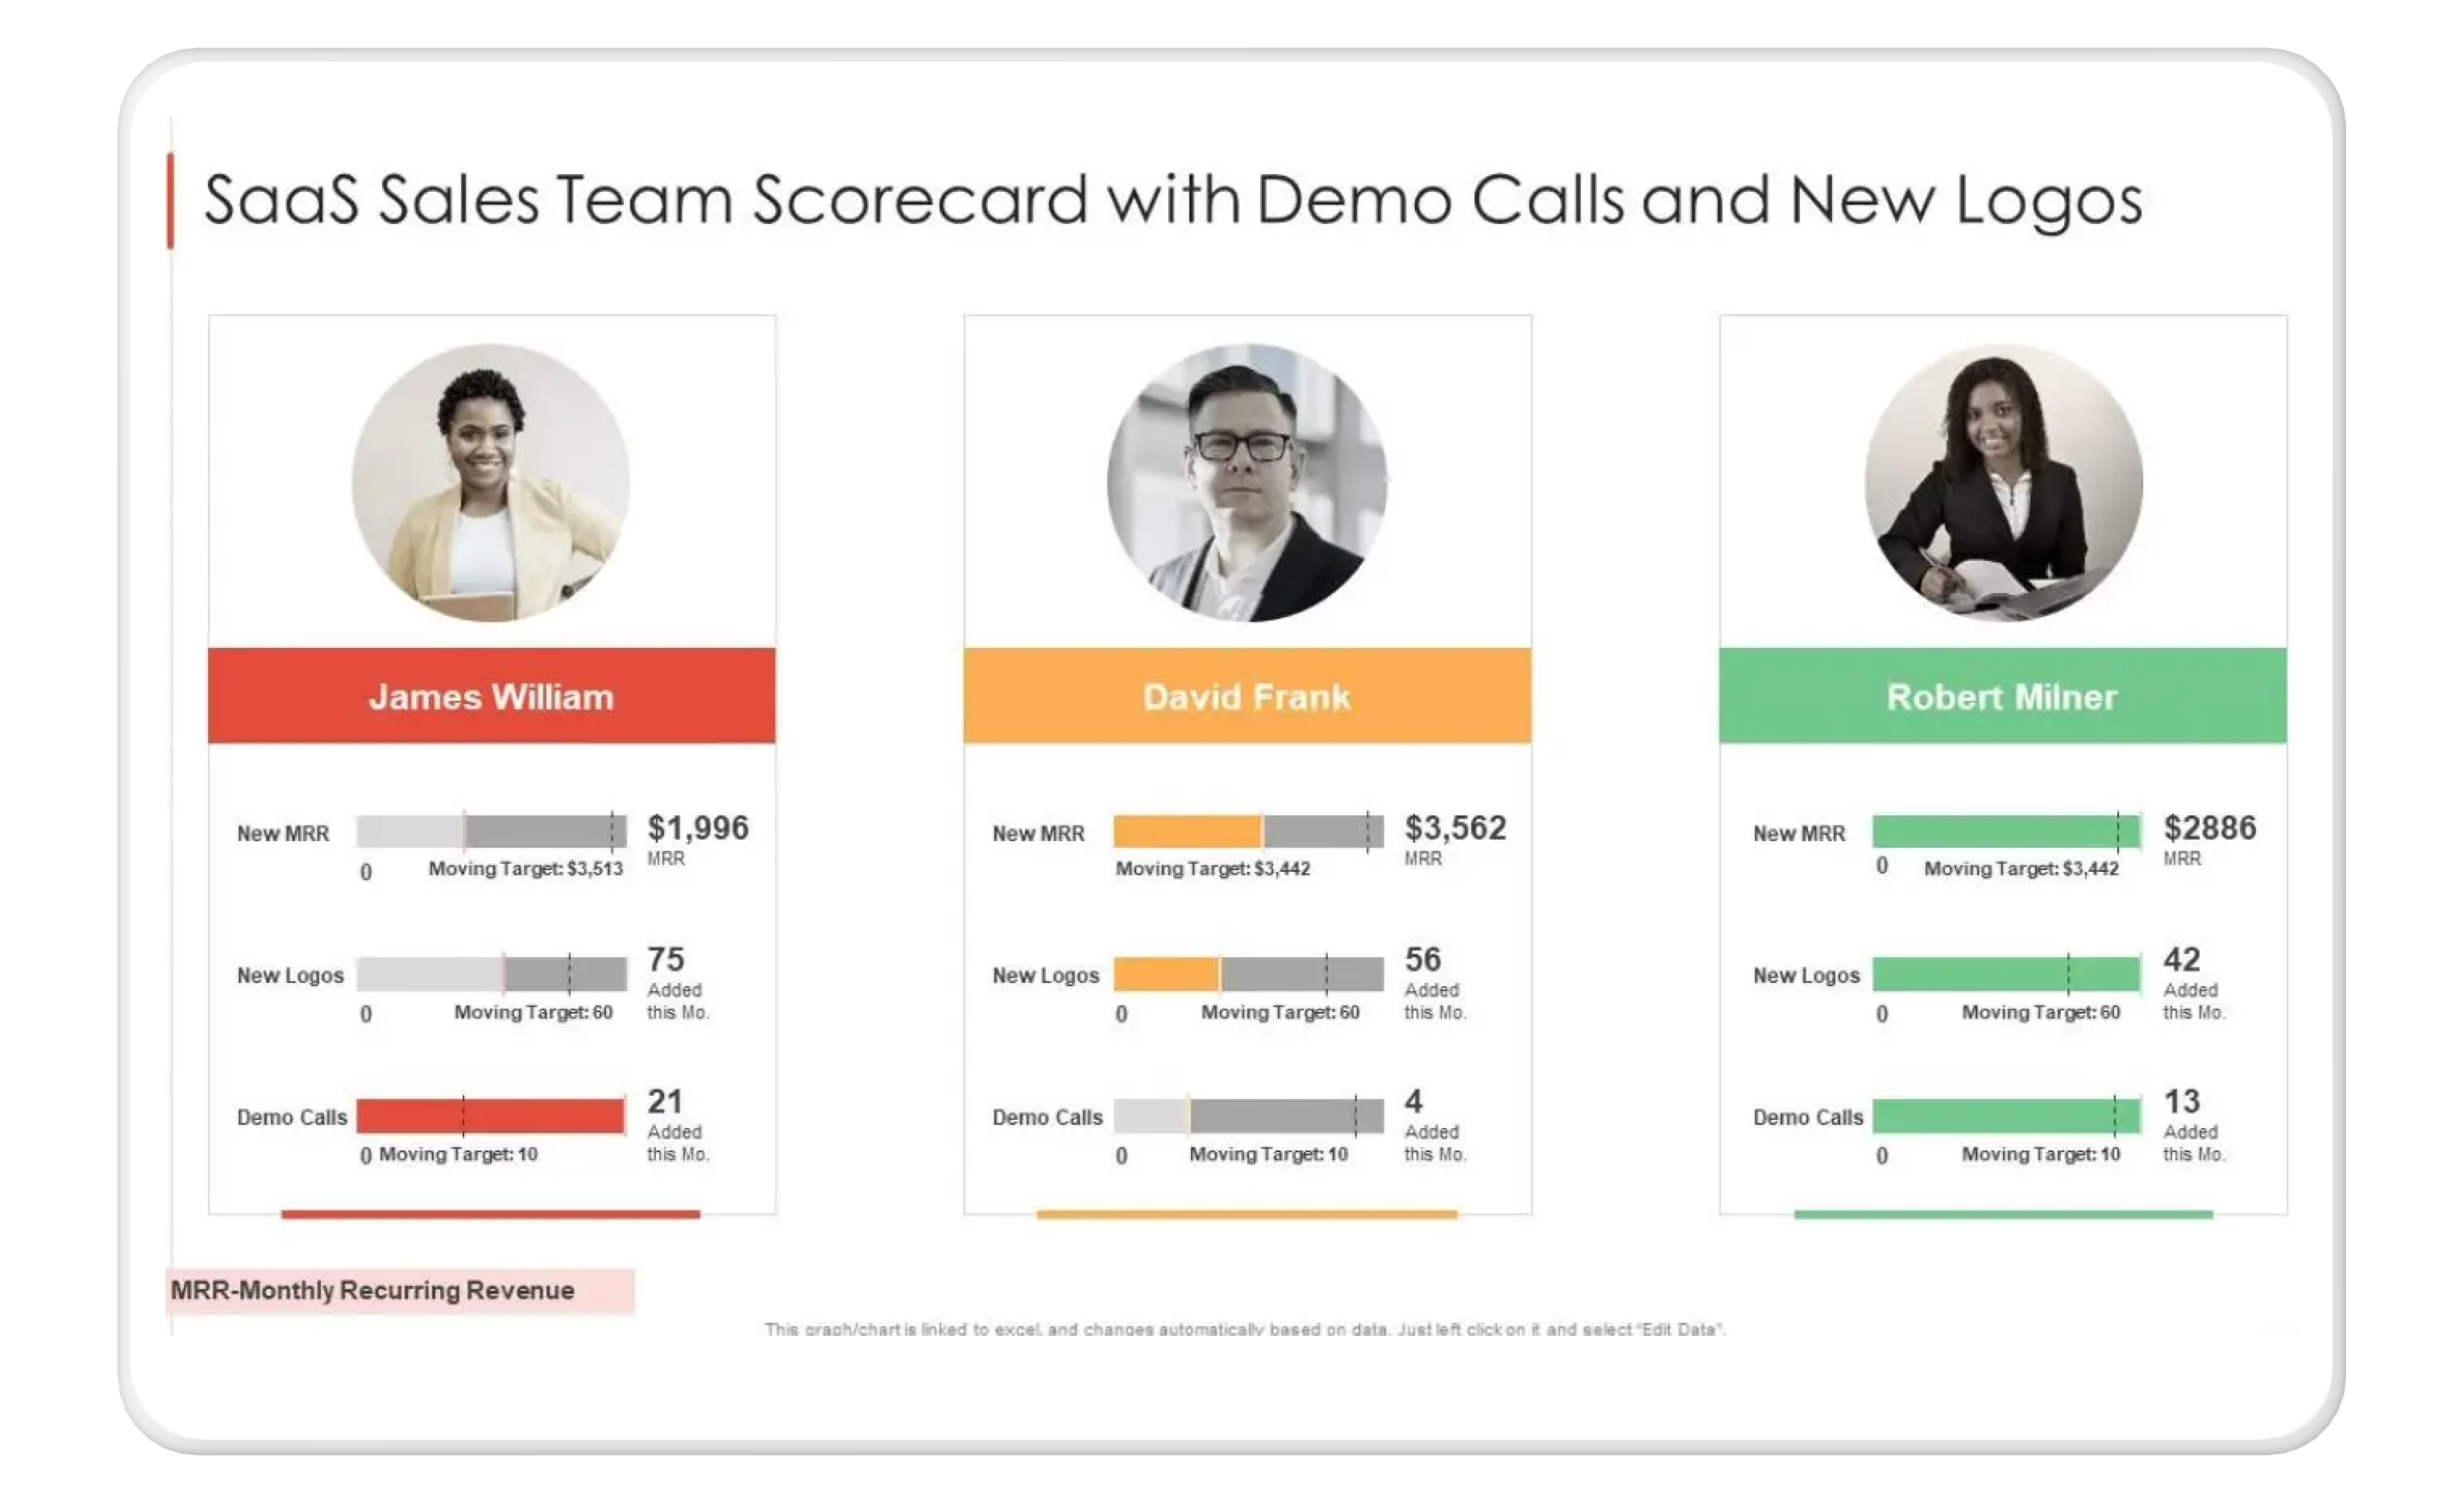 a saas sales team scorecard with demo calls and new logos